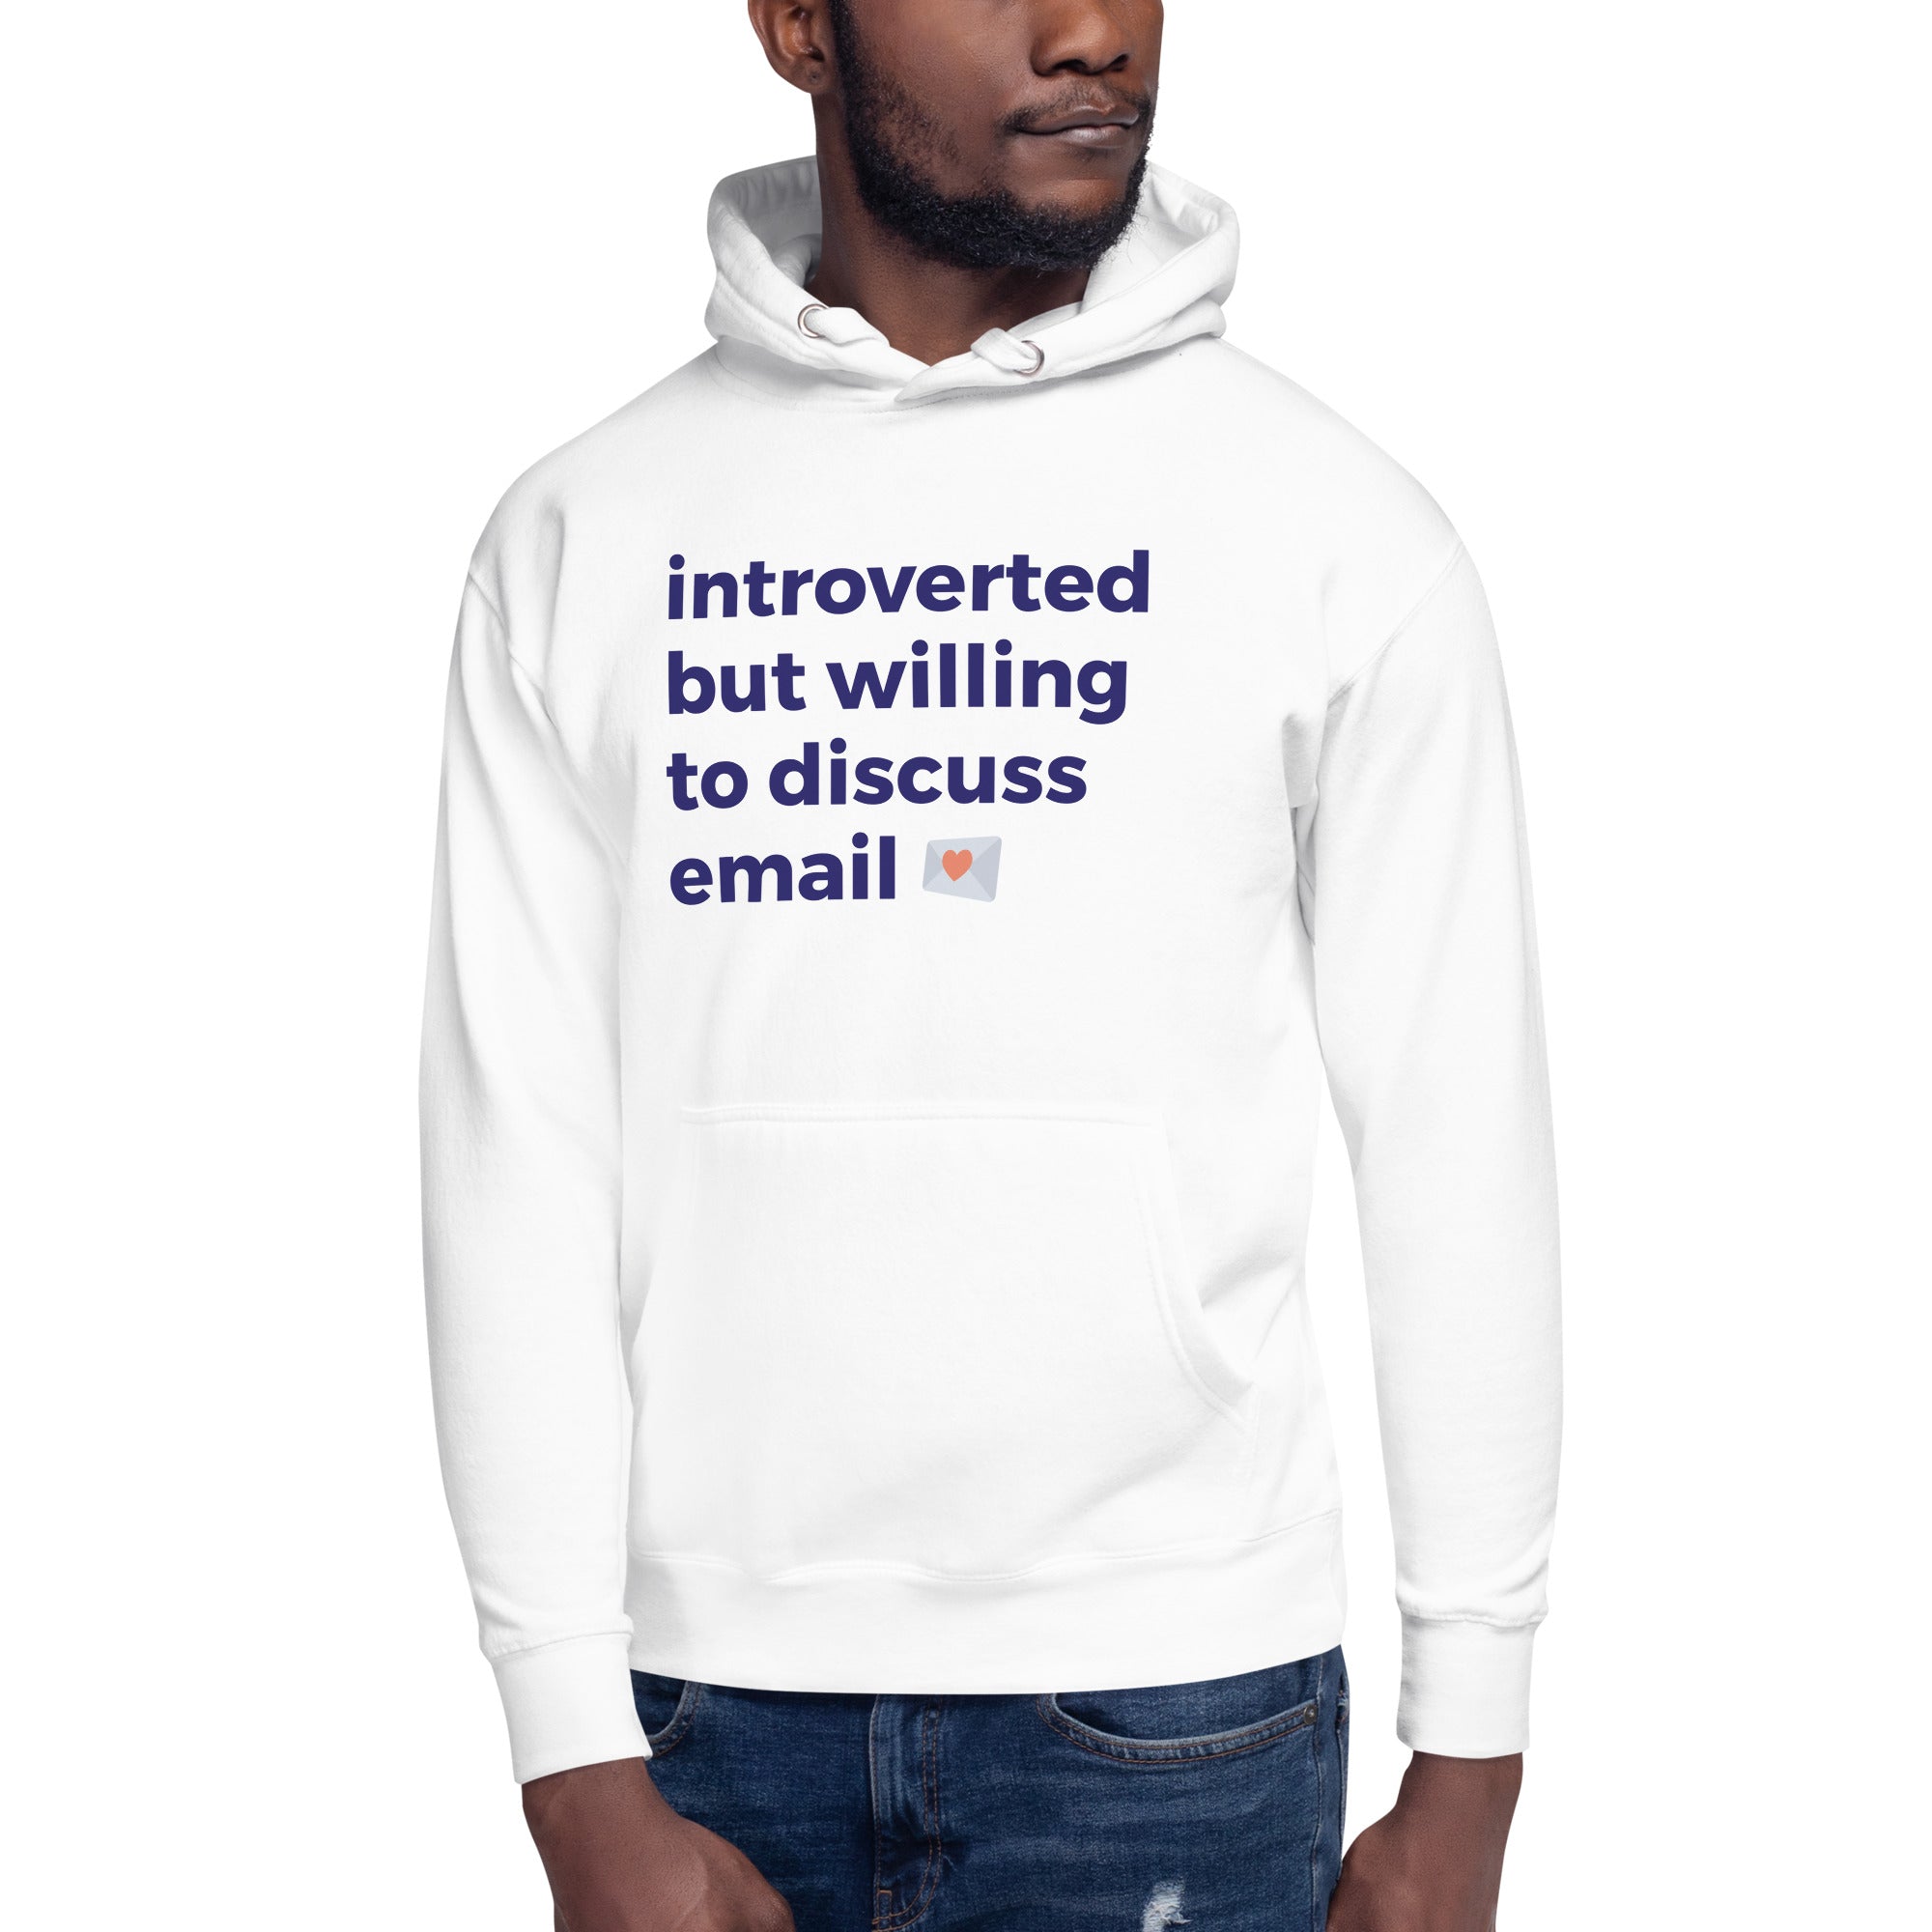 Introverted But Willing To Discuss Email